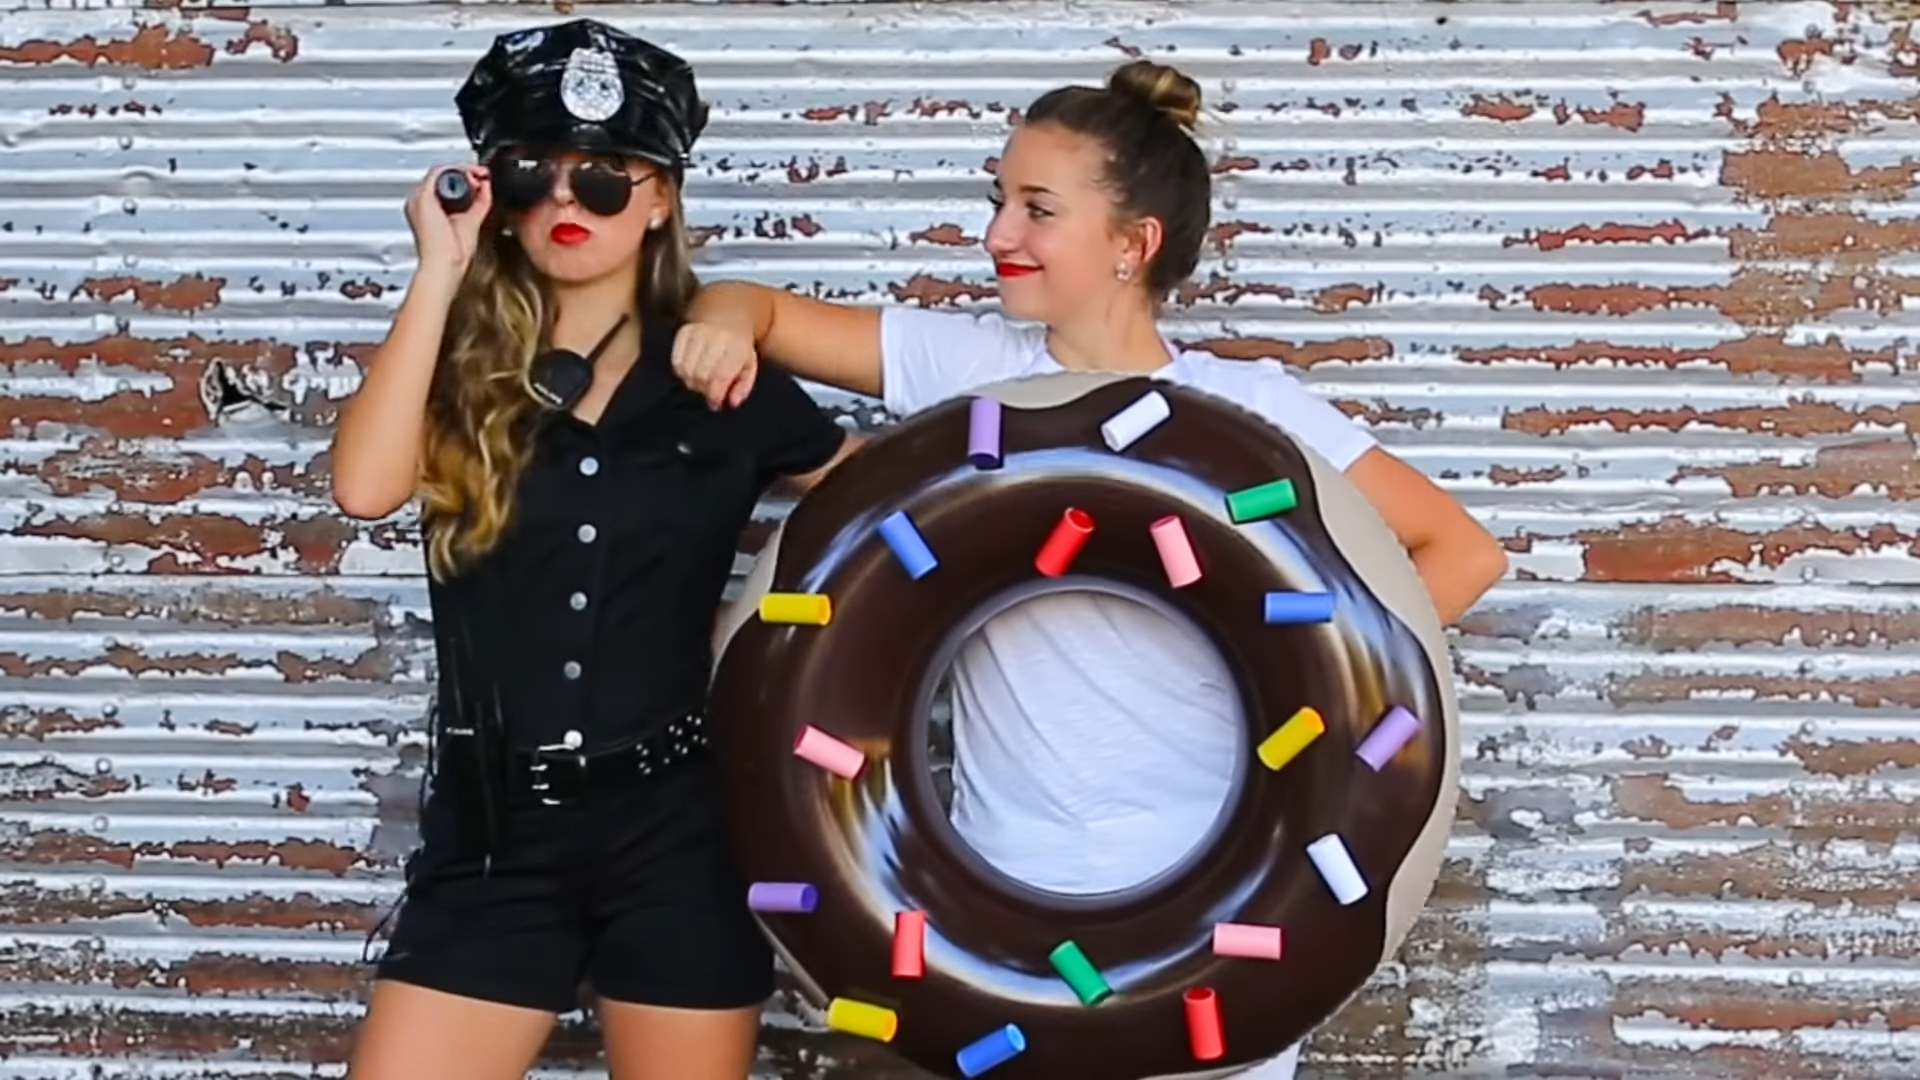 Halloween Costume Ideas for Best Friends or Couples